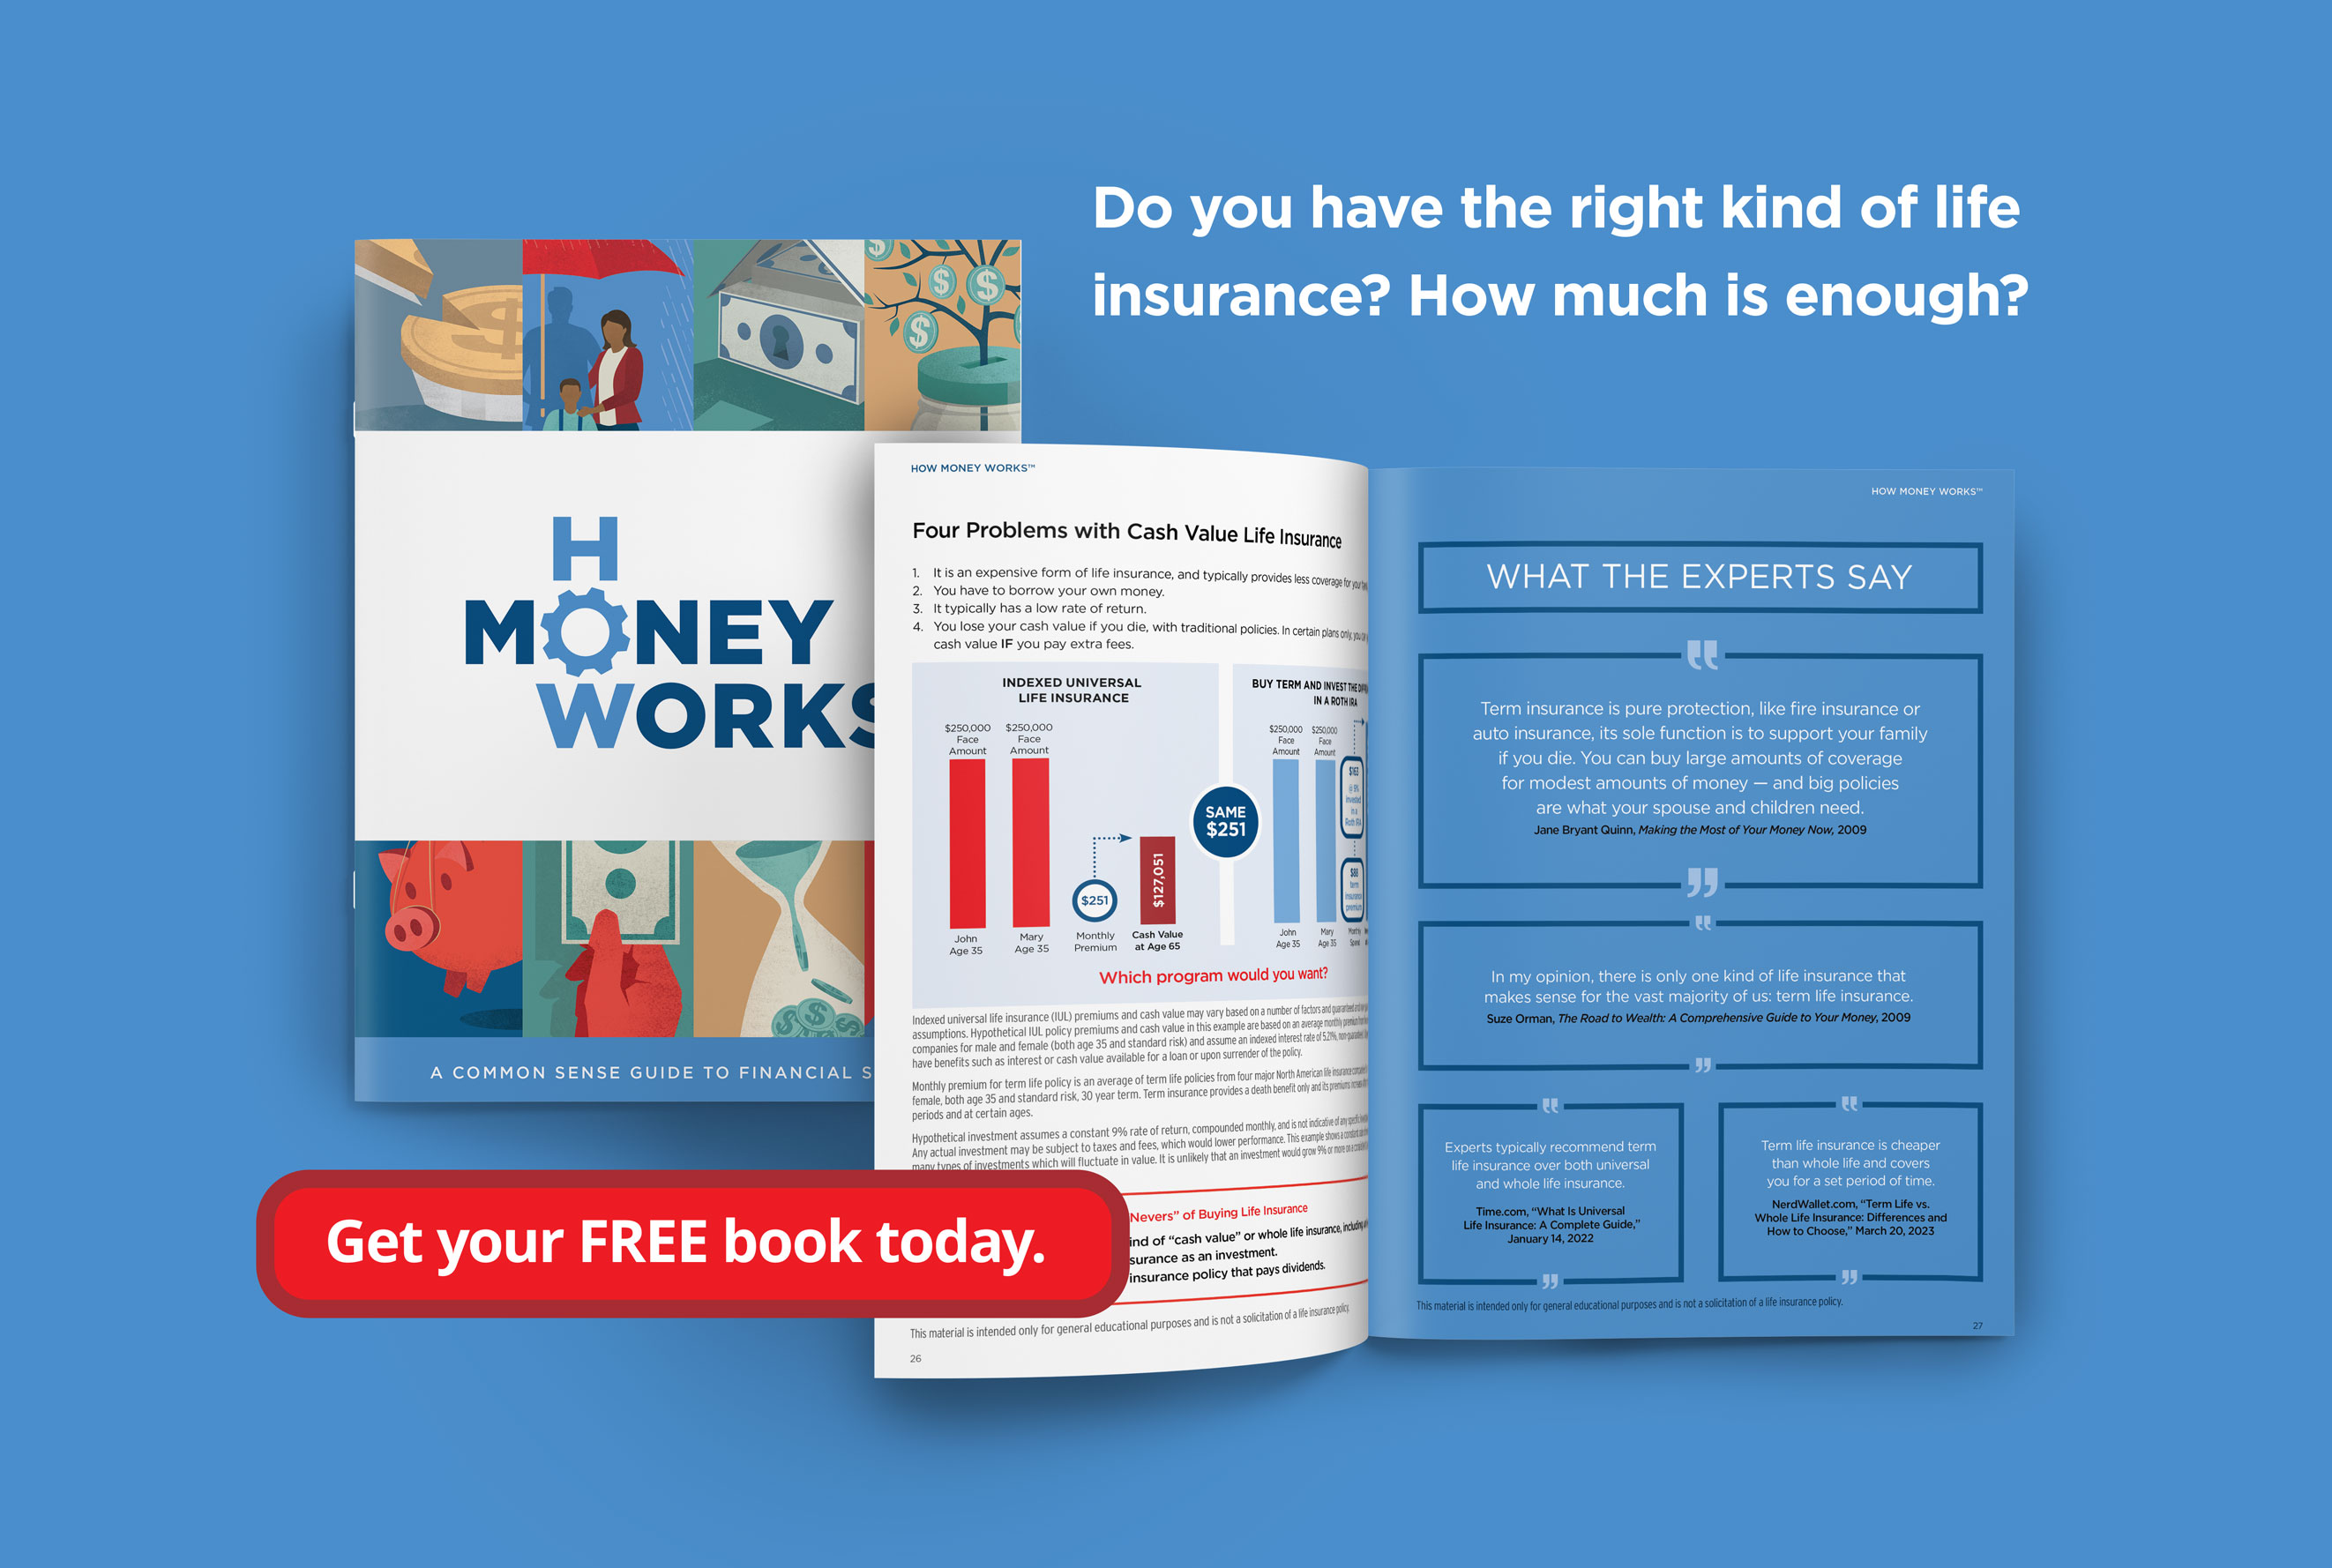 For more financial concepts, download a copy of How Money Works™. Get Your FREE copy today!